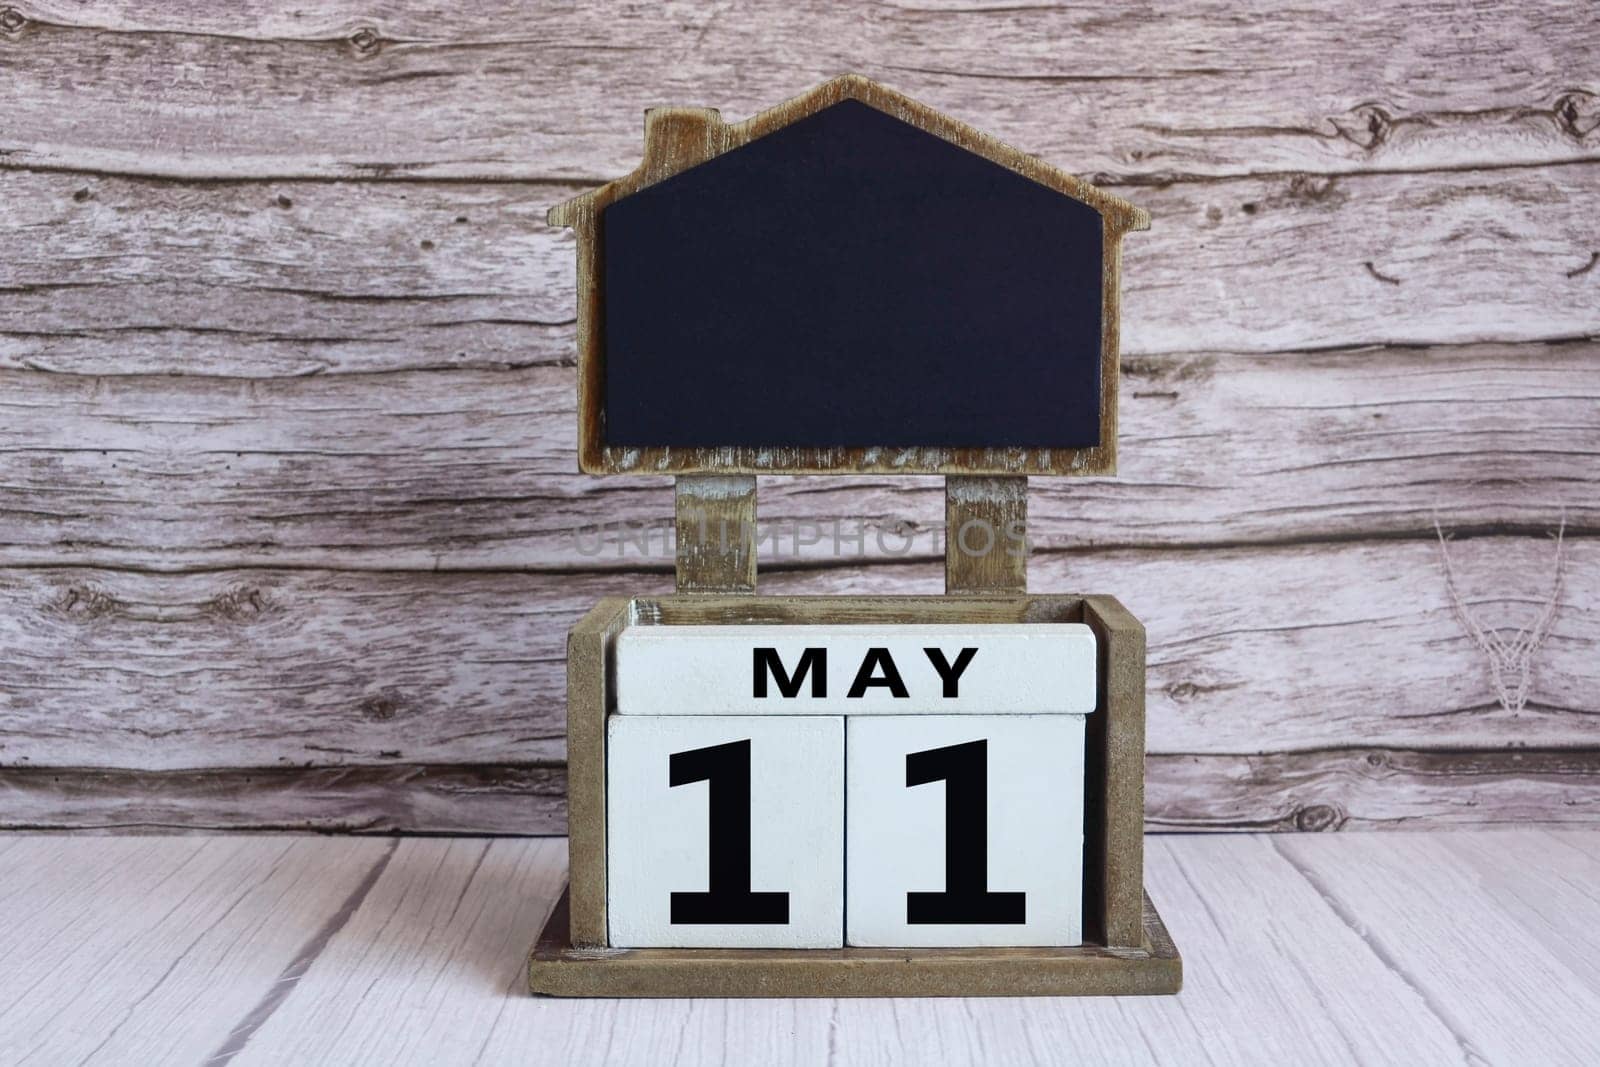 Chalkboard with May 11 calendar date on white cube block on wooden table.